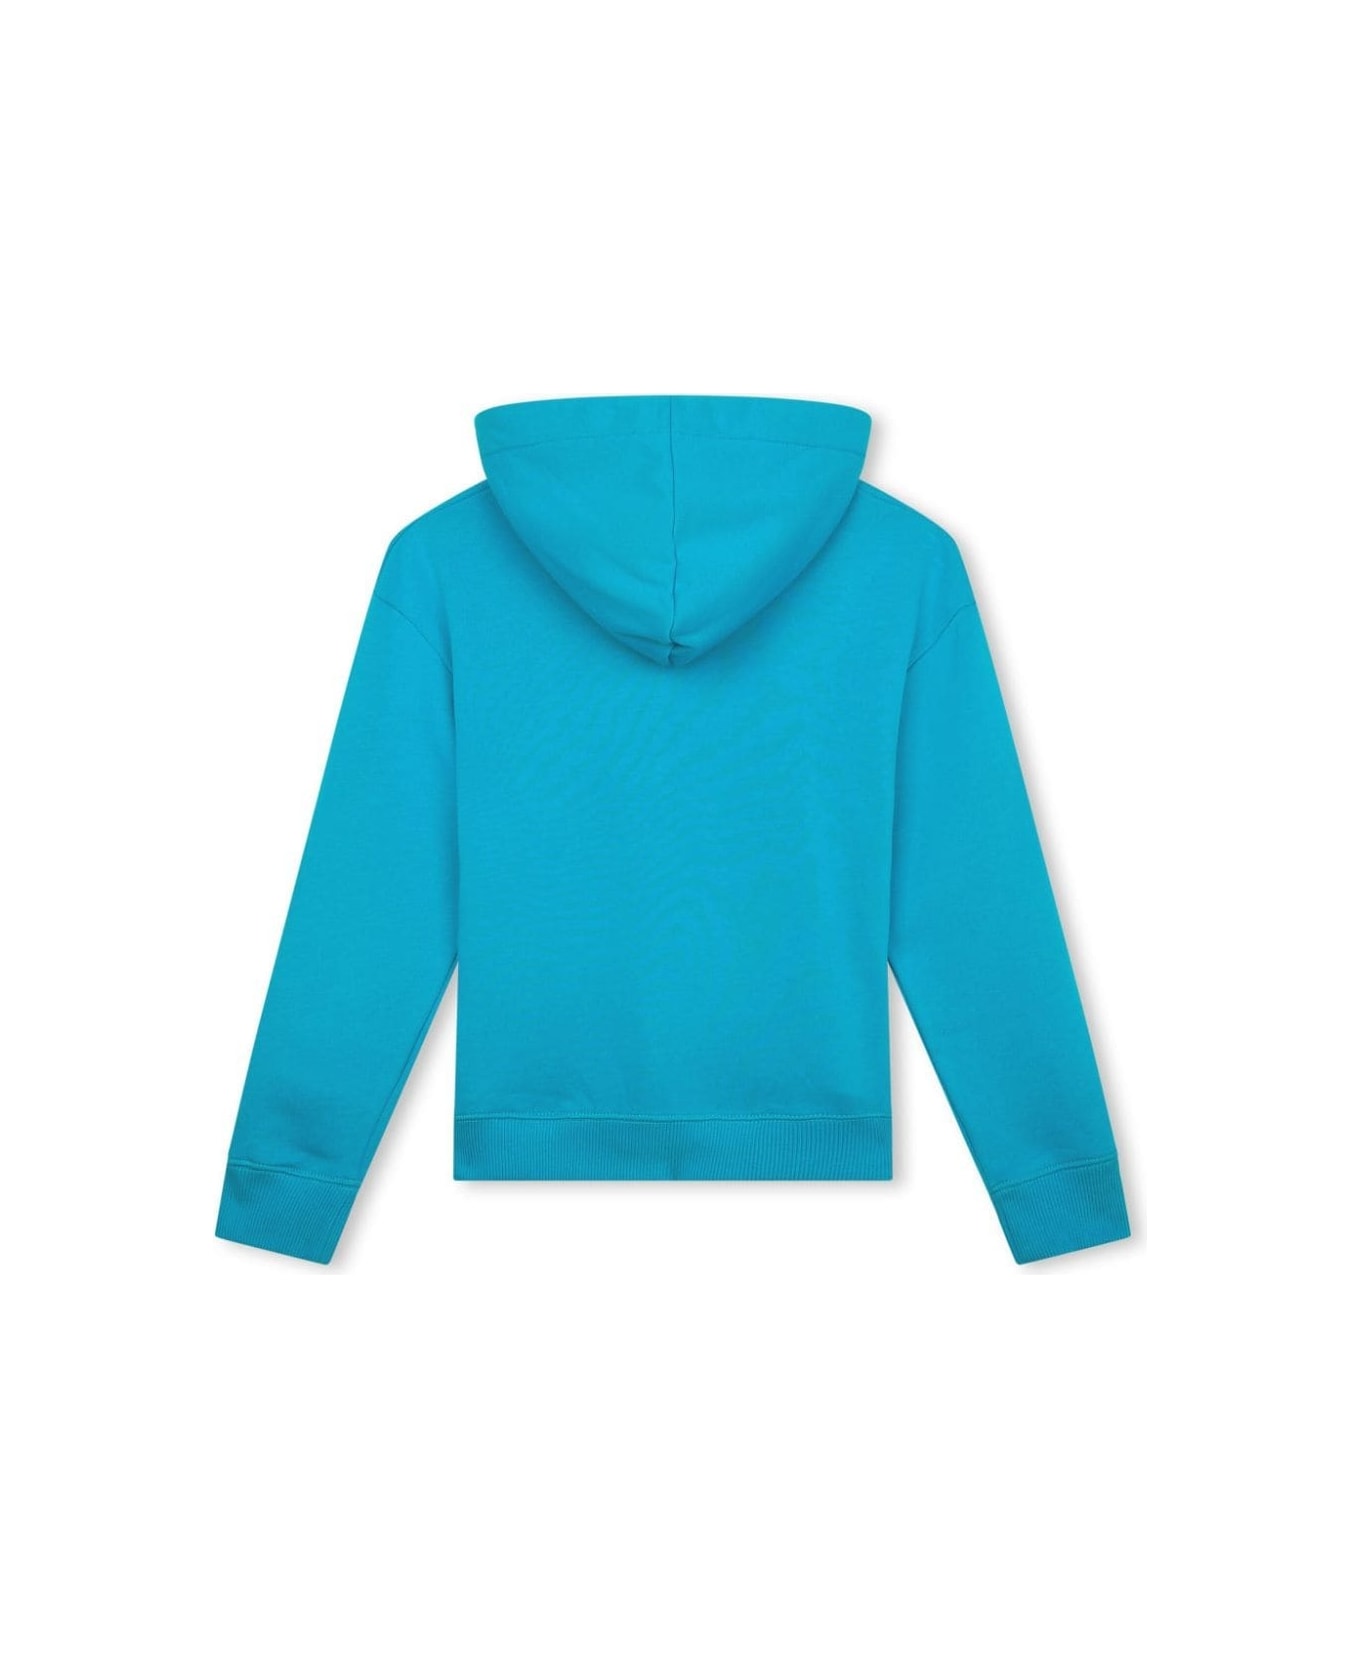 Lanvin Turquoise Hoodie With Logo And "curb" Motif - Blue